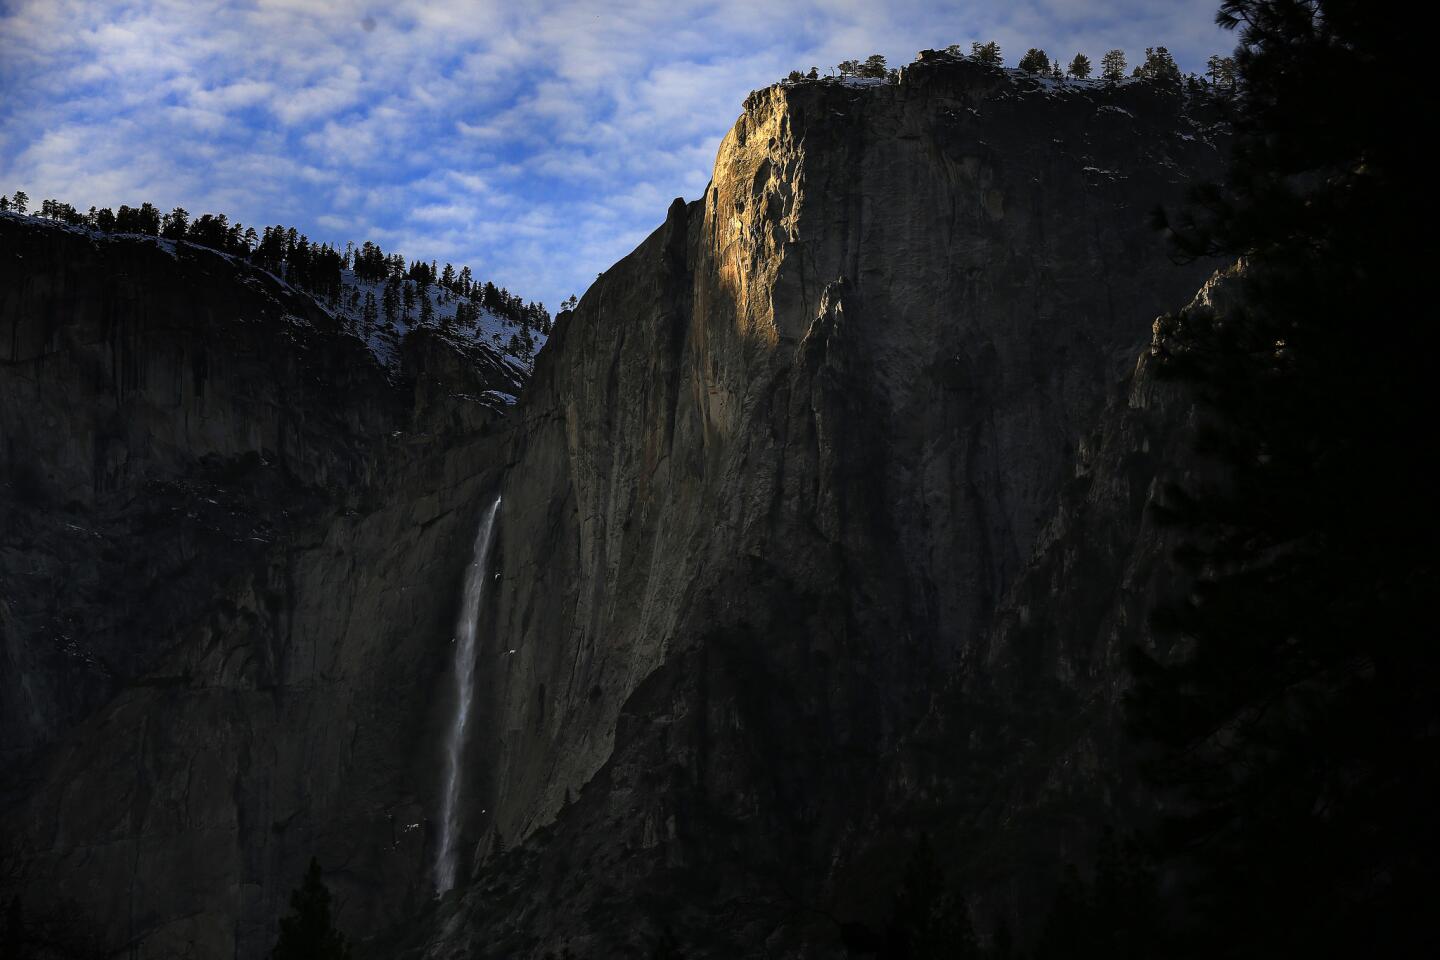 Sunlight sets a granite cliff aglow above Upper Yosemite Falls as recent storms have brought the falls back to life in Yosemite National Park.